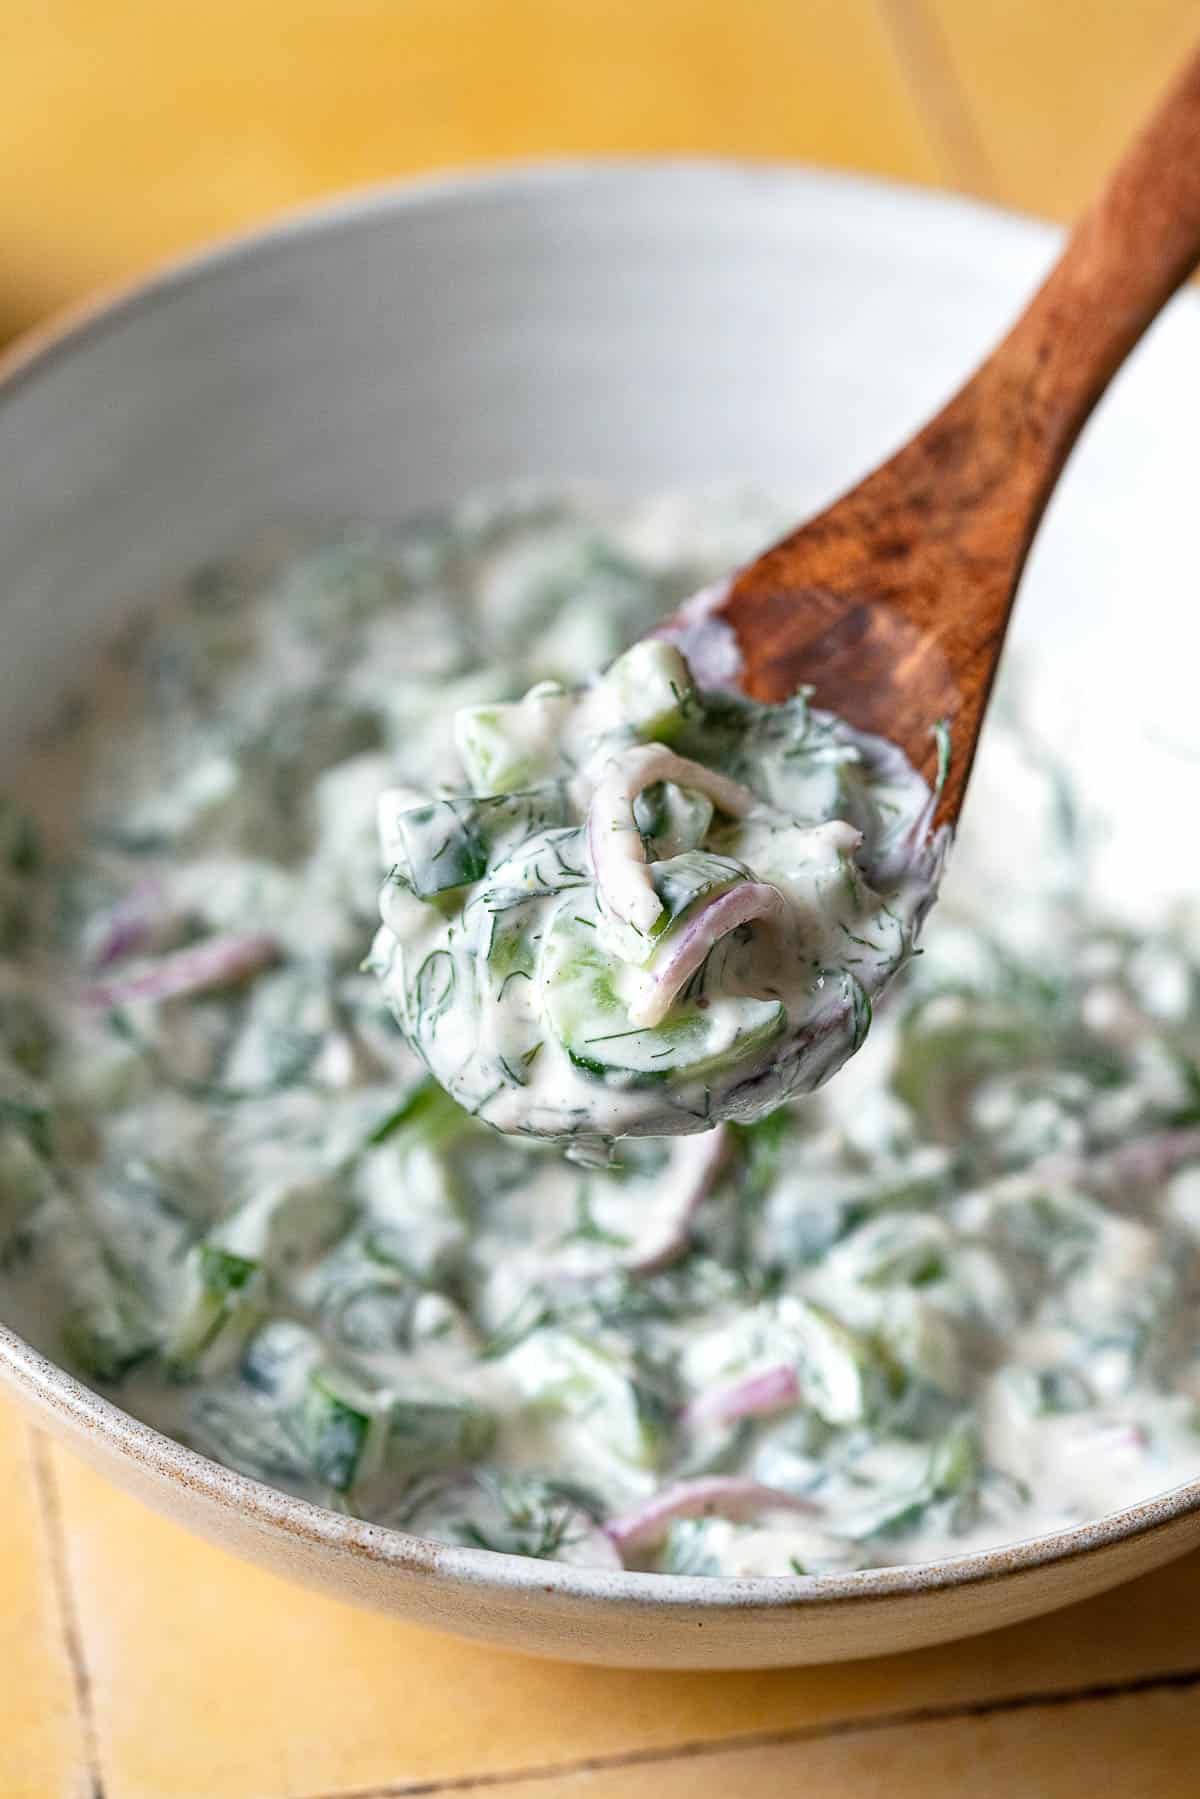 a bite of creamy cucumber salad being lifted out of a serving bowl with a wooden serving spoon.